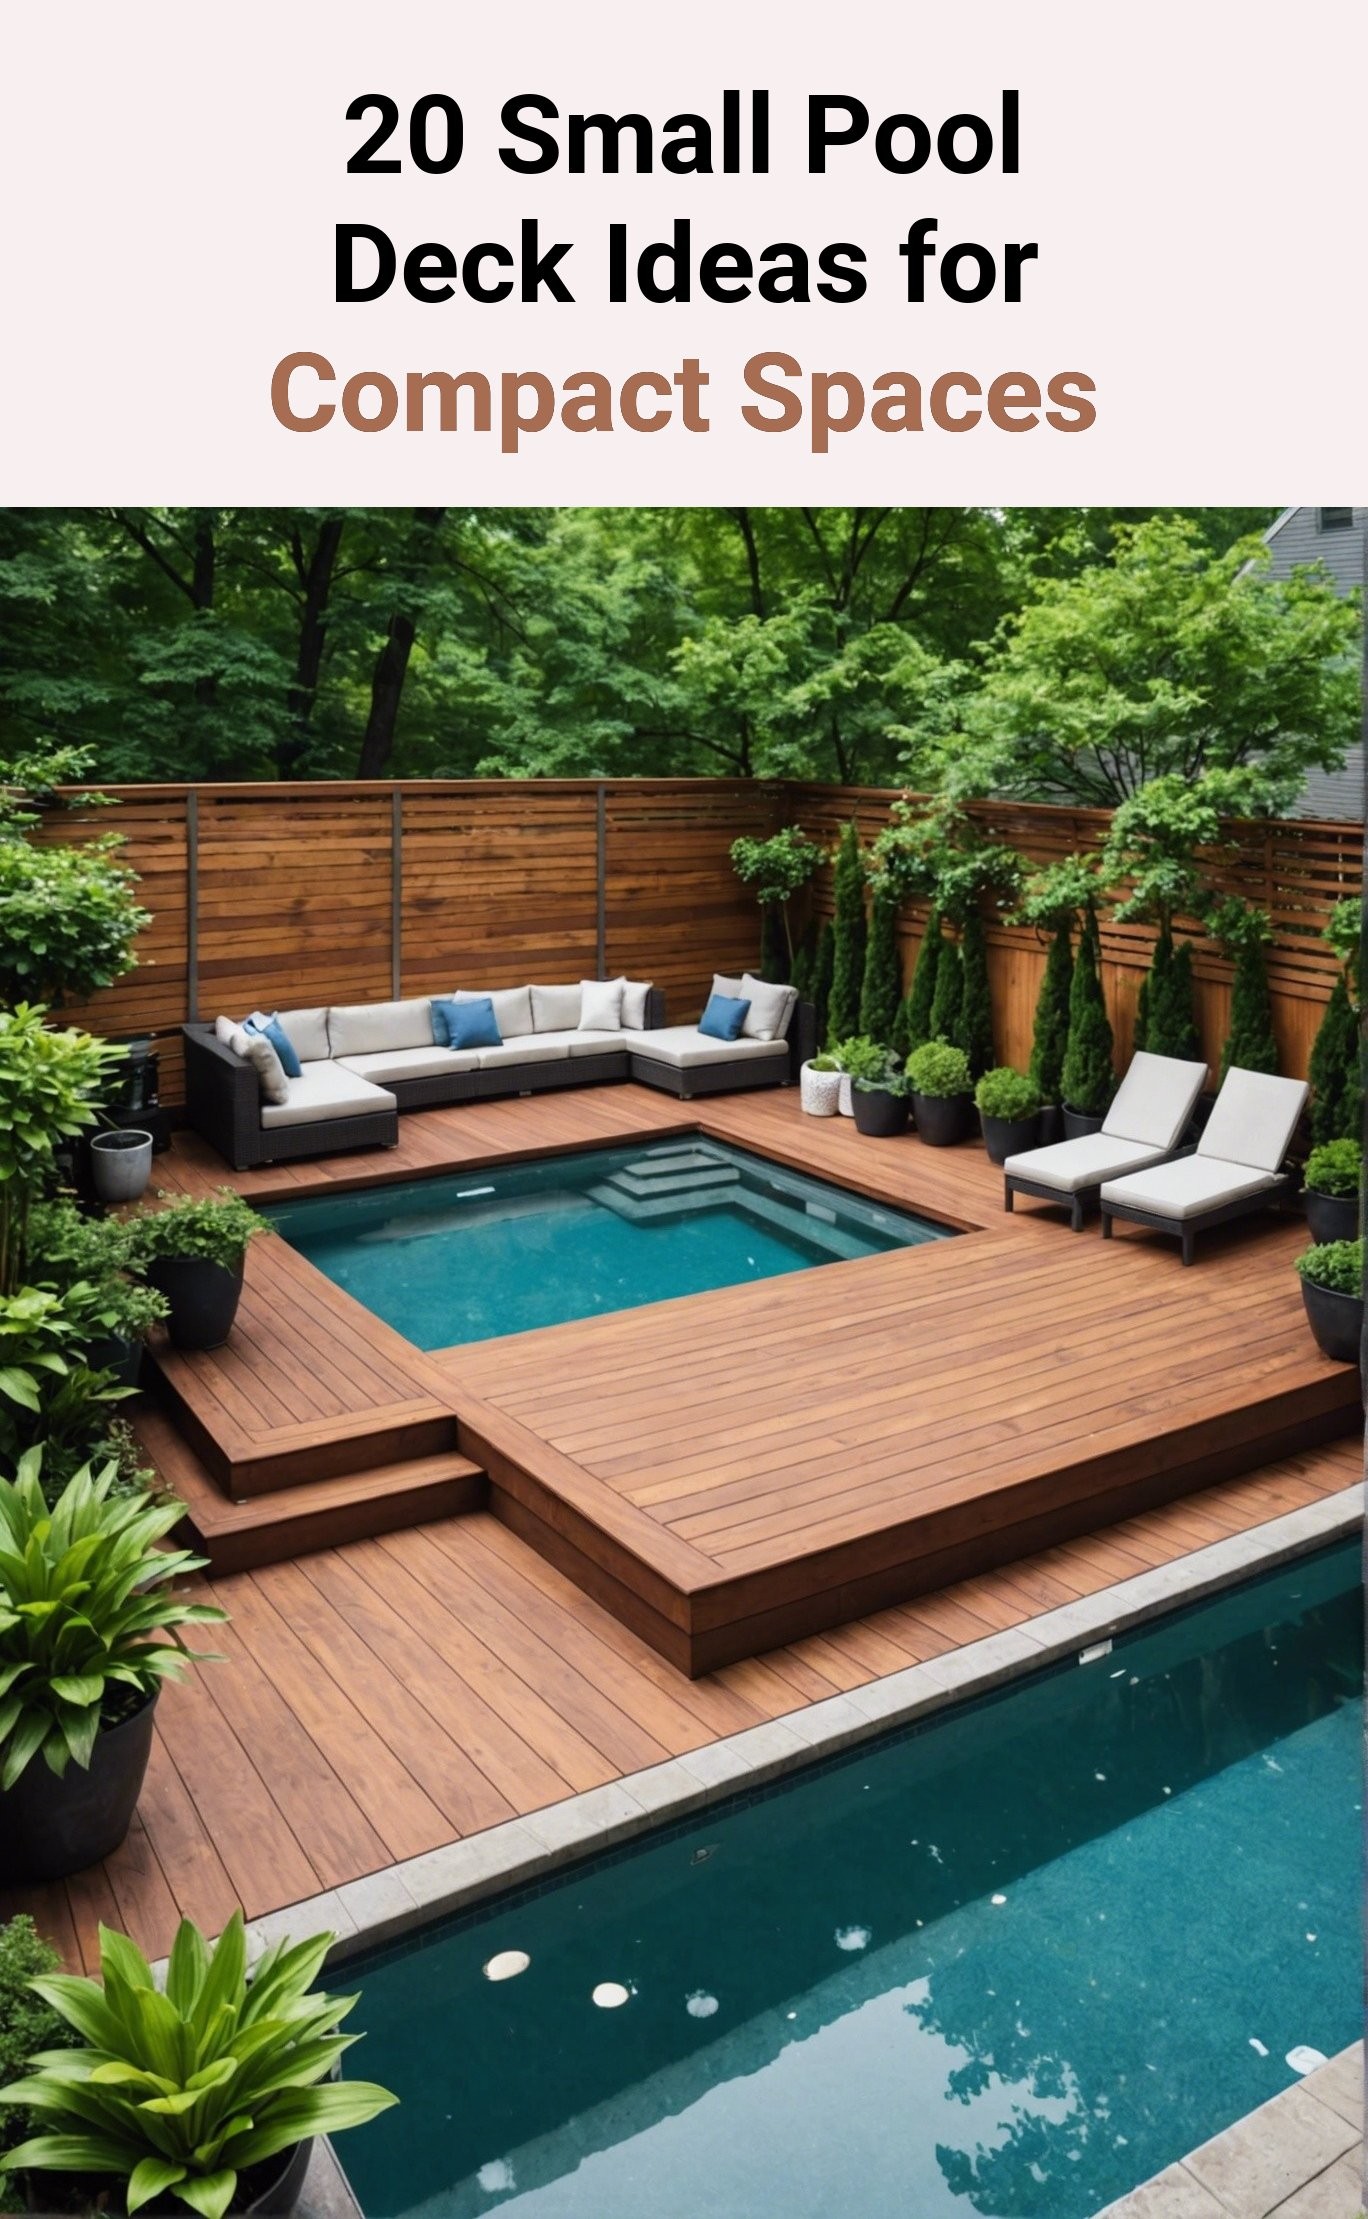 20 Small Pool Deck Ideas for Compact Spaces